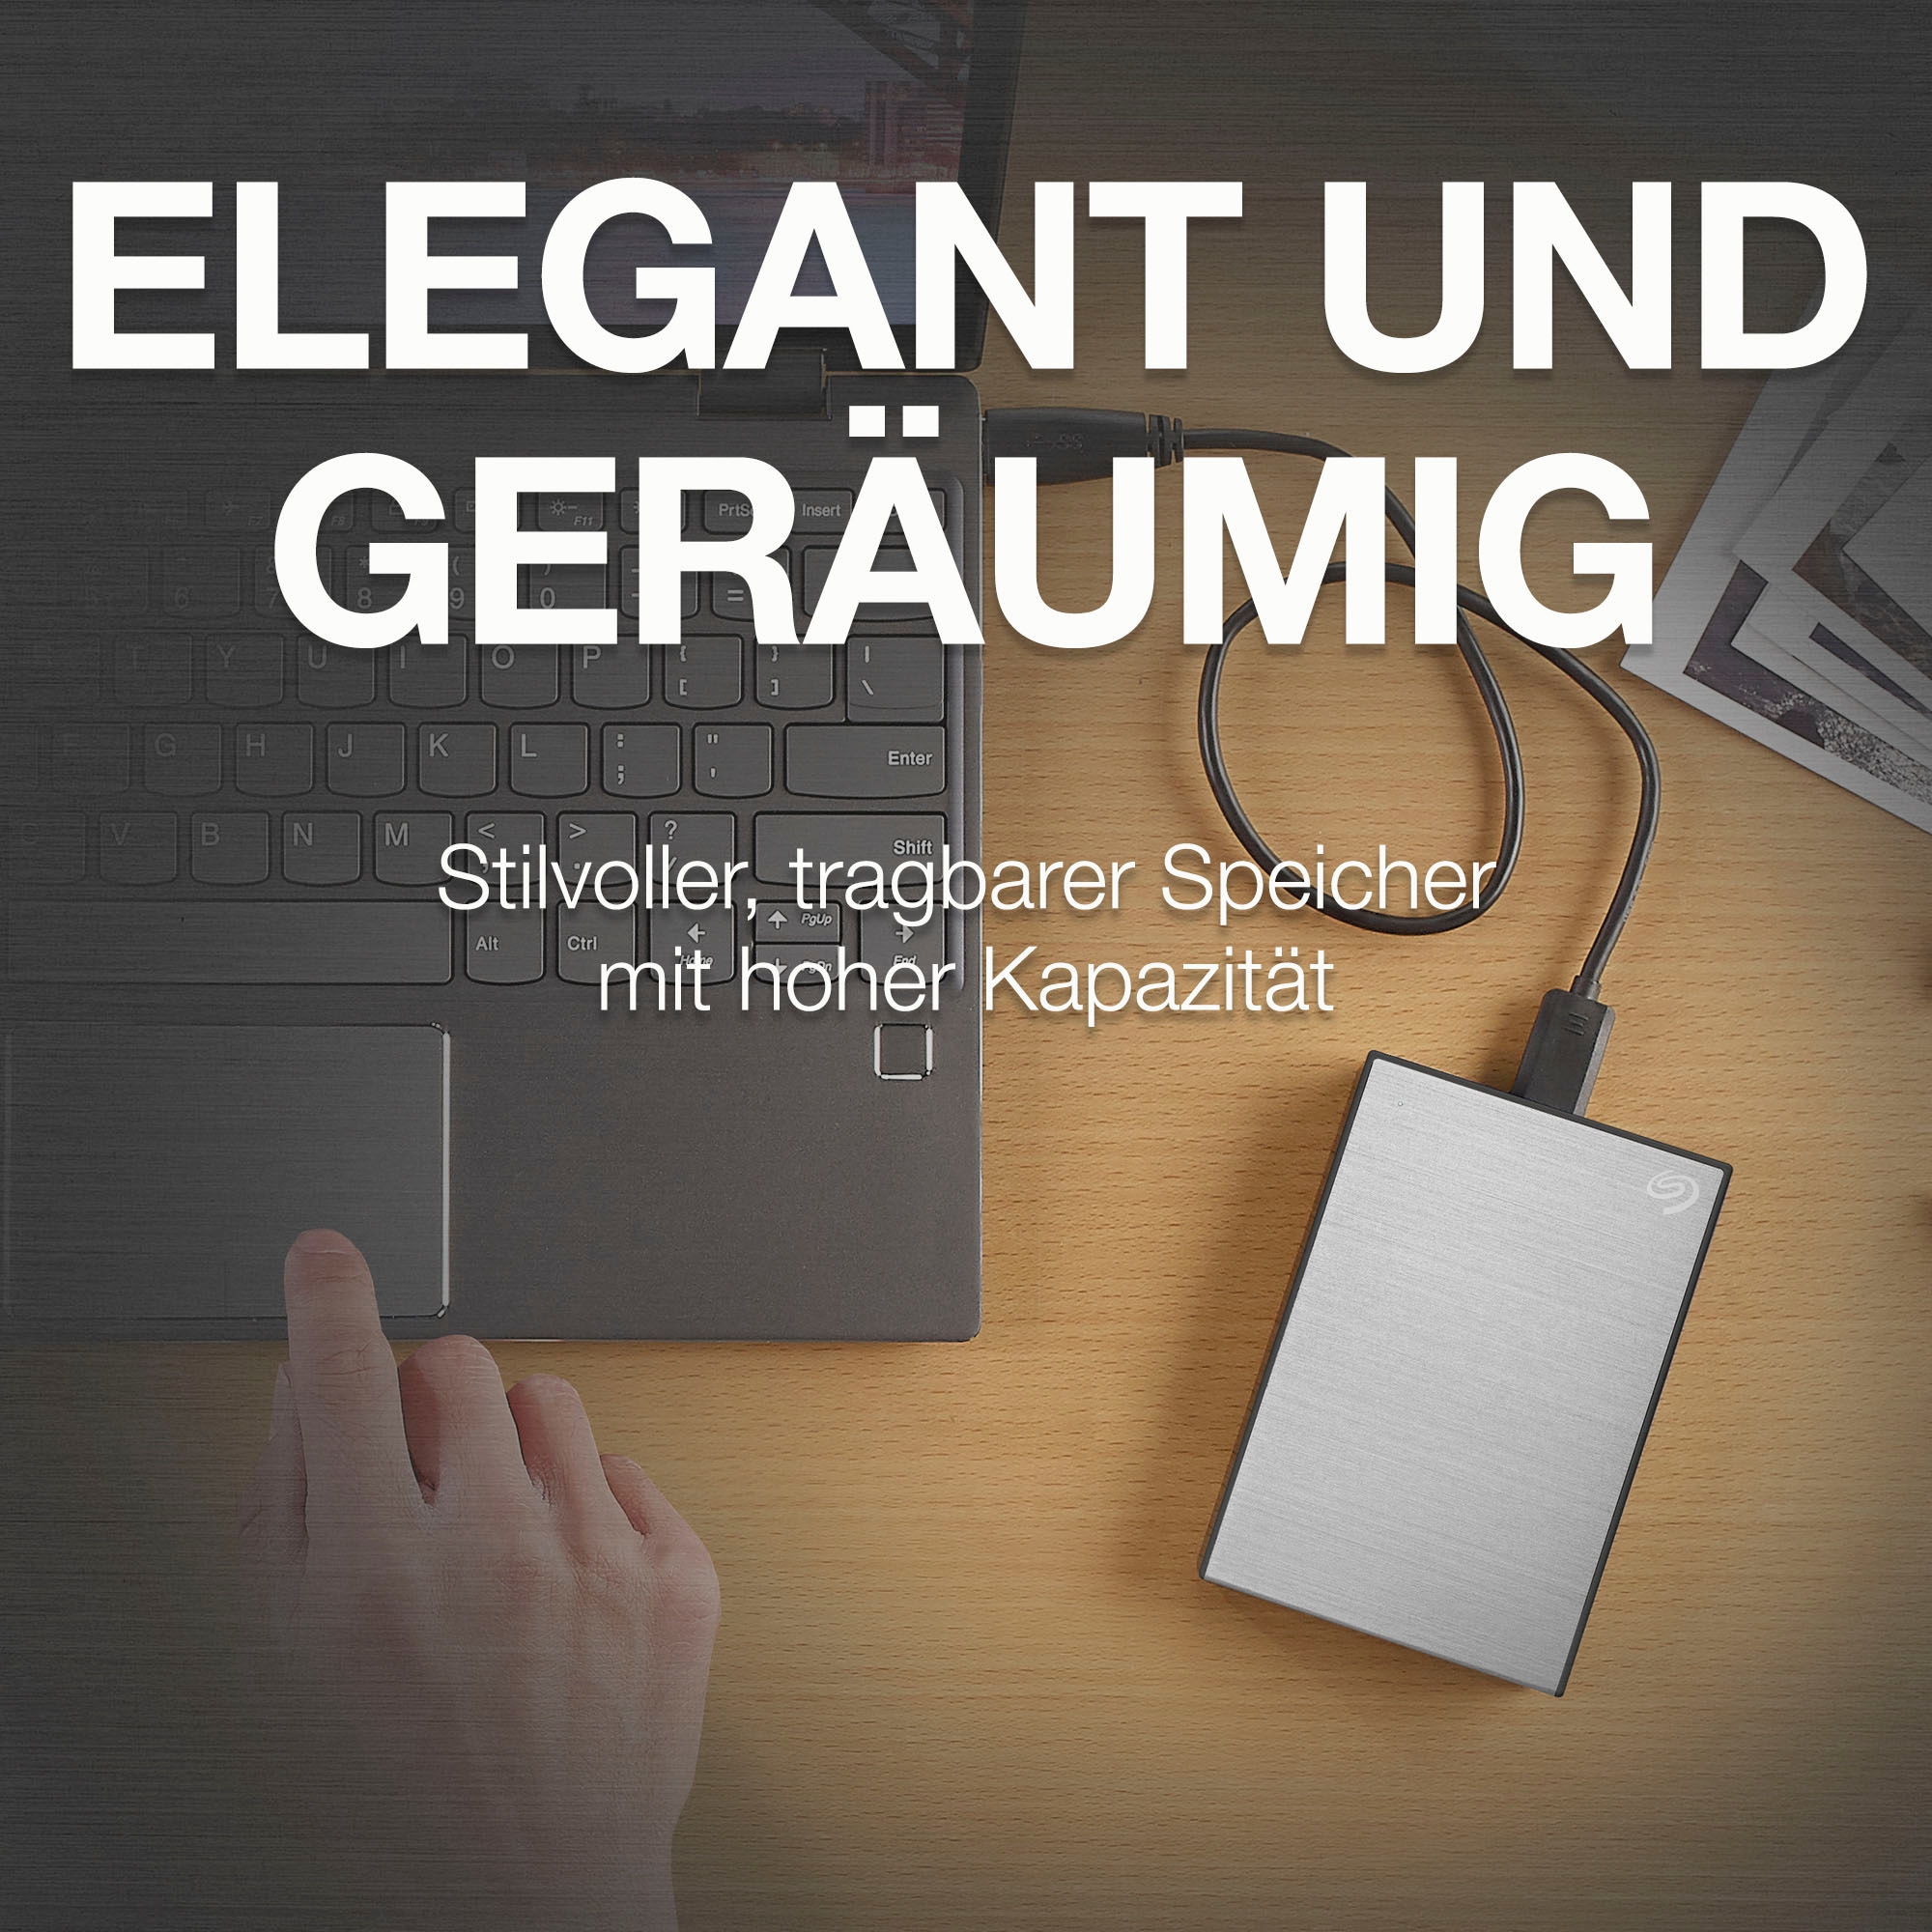 Seagate externe HDD-Festplatte »One Touch Portable Drive 1TB«, 2,5 Zoll,  Anschluss USB 3.2, Inklusive 2 Jahre Rescue Data Recovery Services ➥ 3  Jahre XXL Garantie | UNIVERSAL